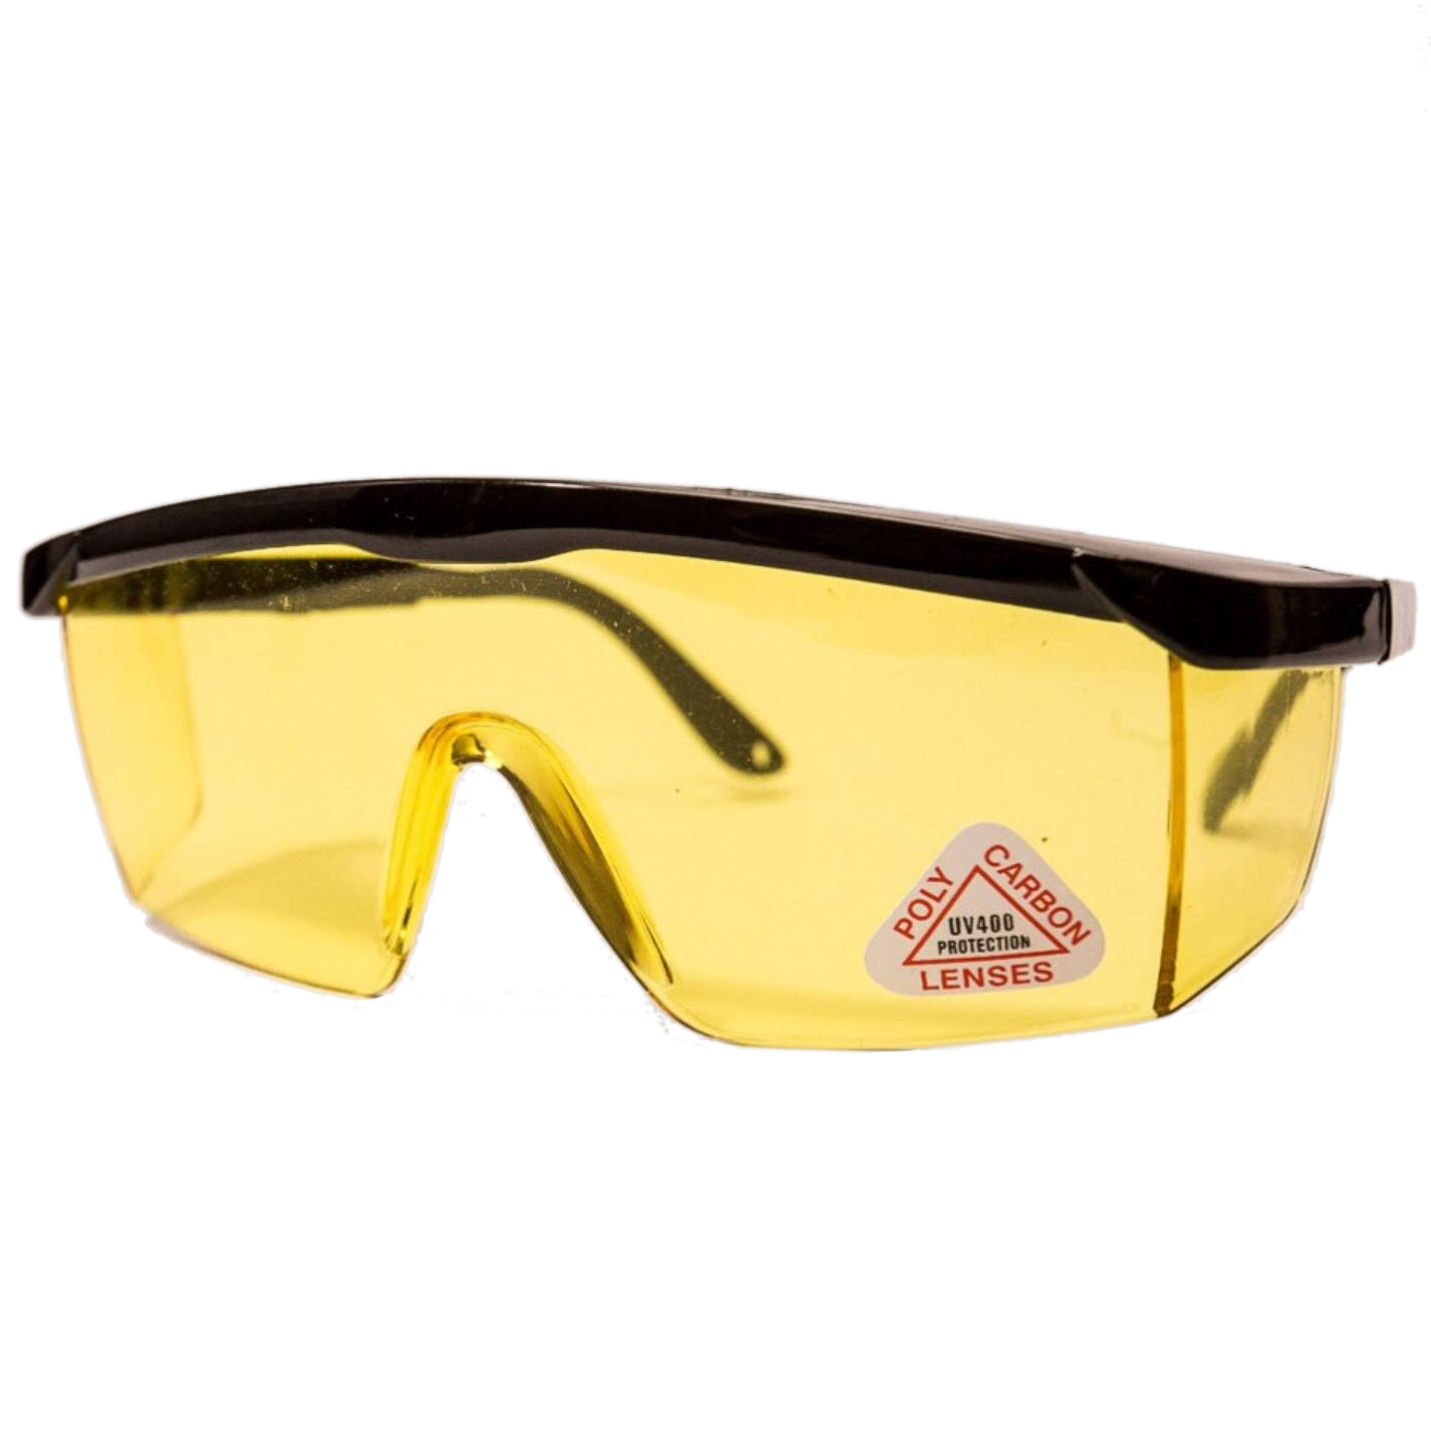 Medical Safety Glasses, with black frame and yellow lenses